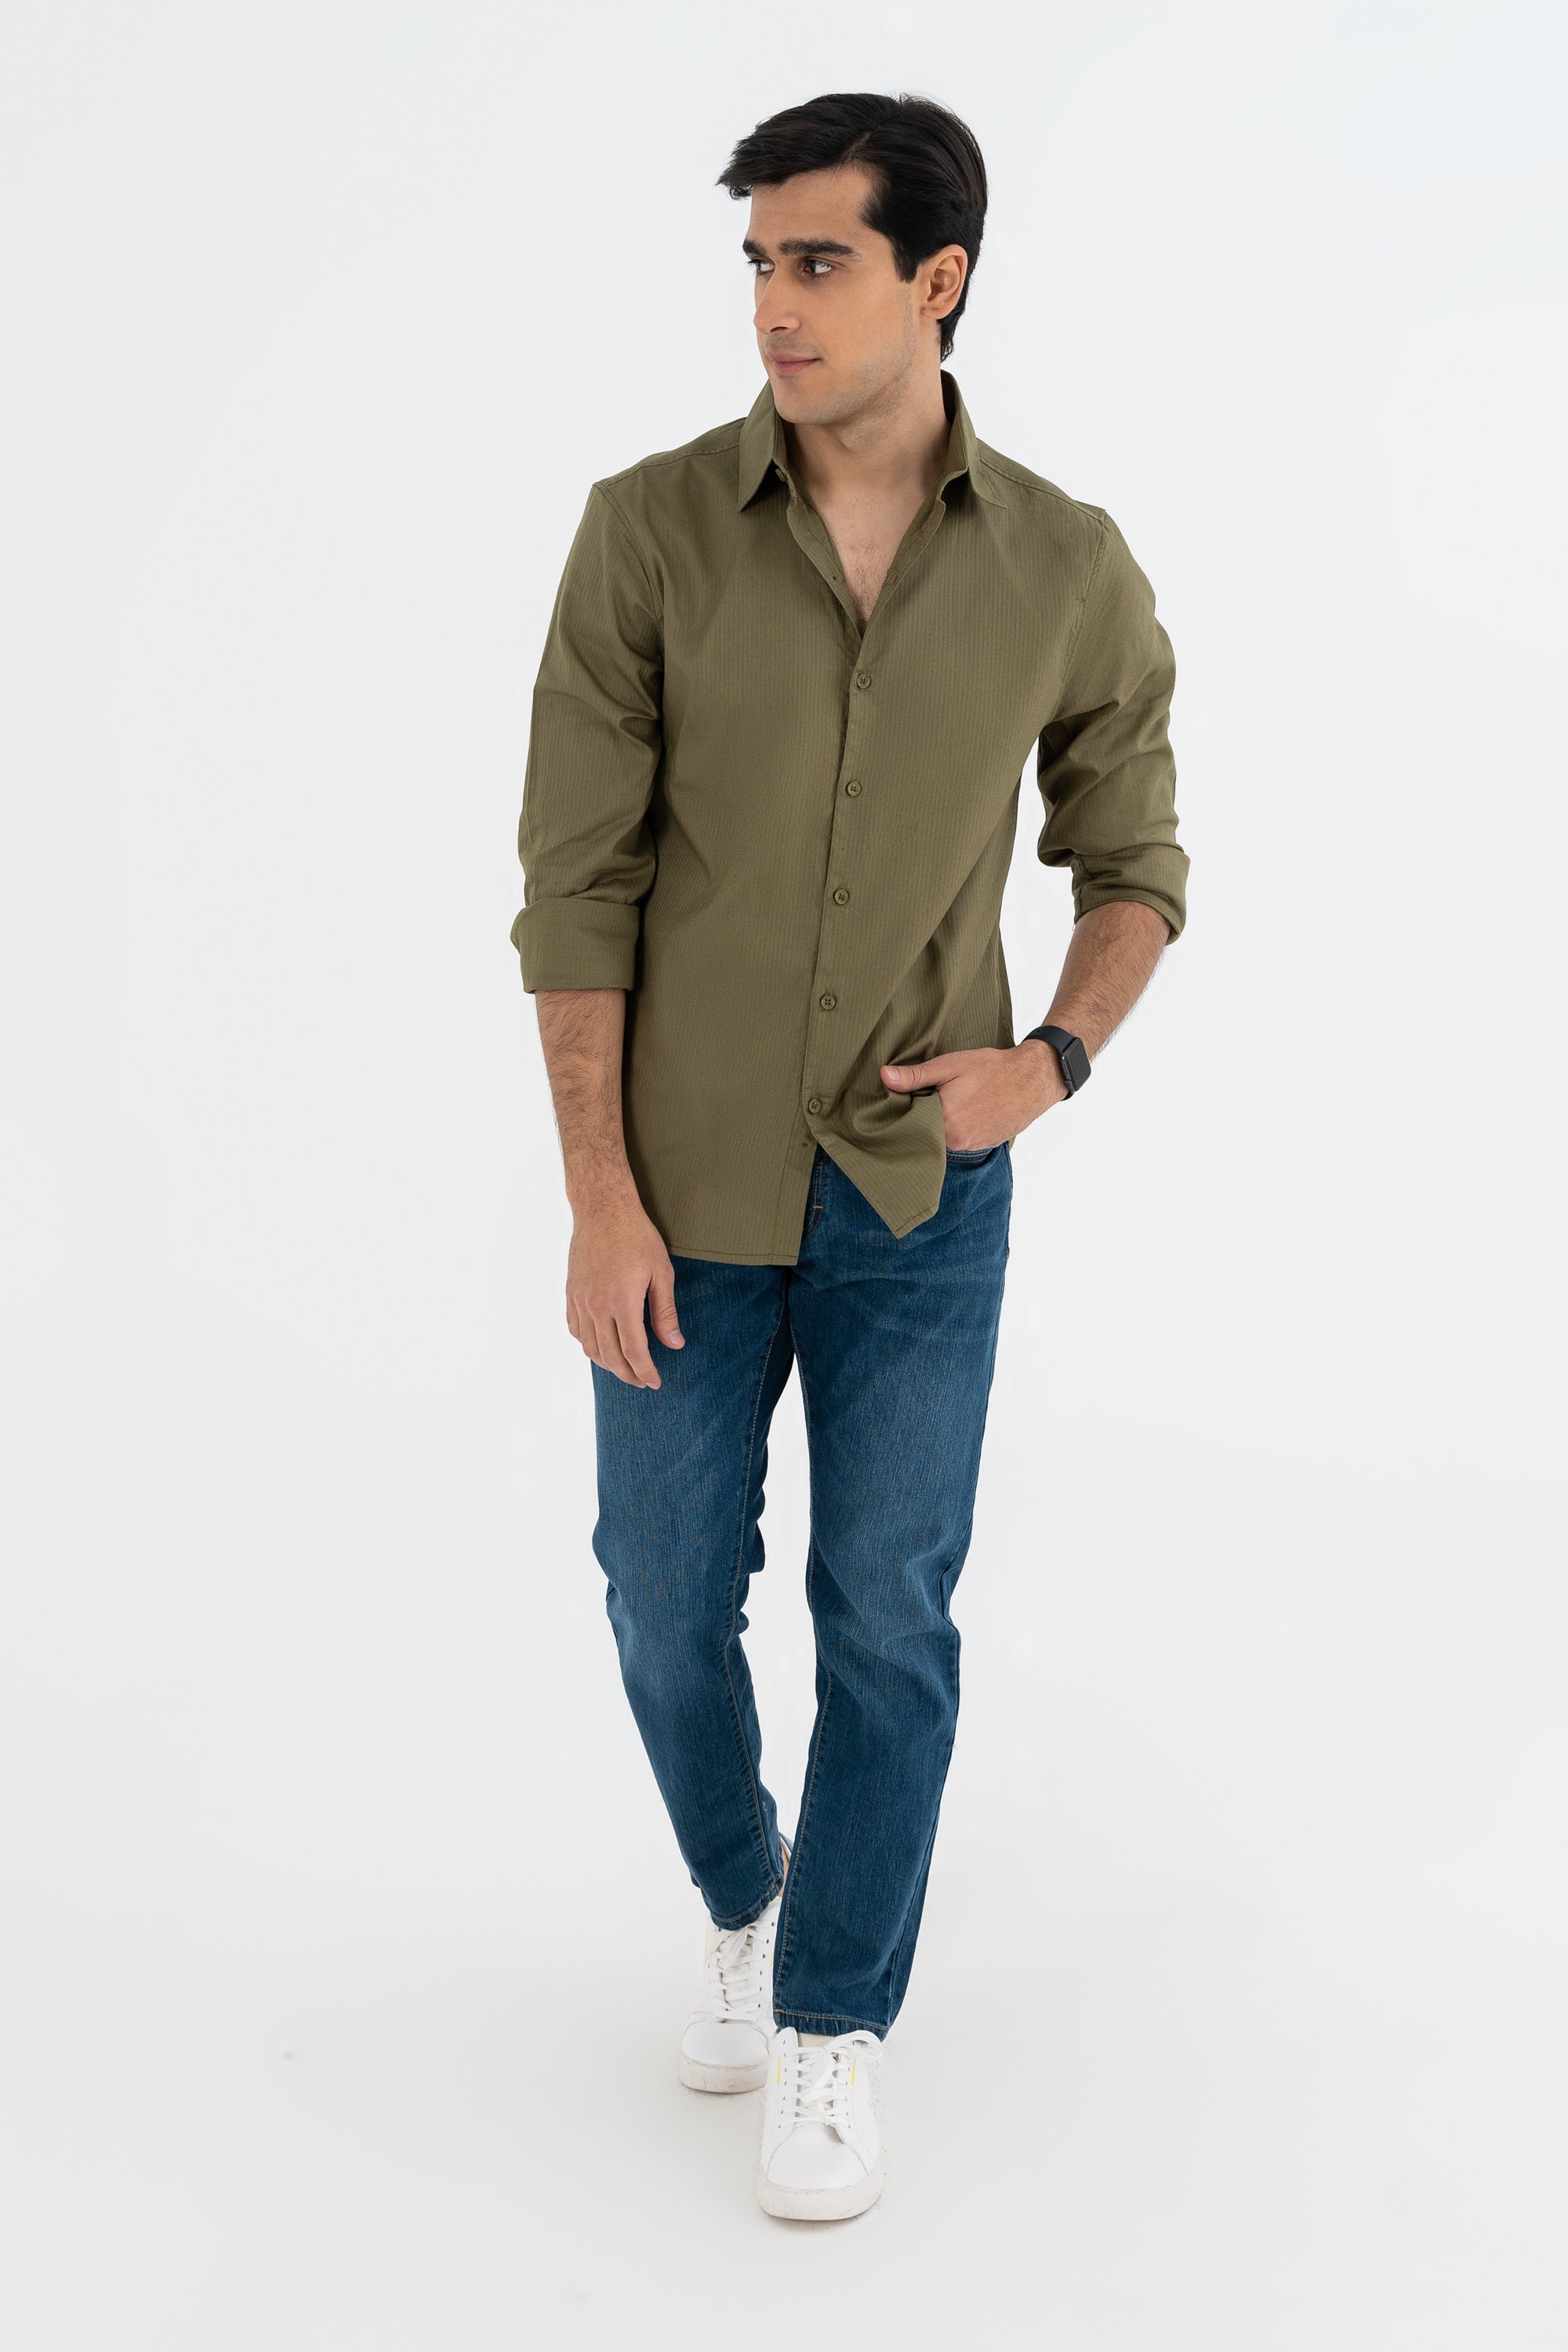 Olive Collared Shirt